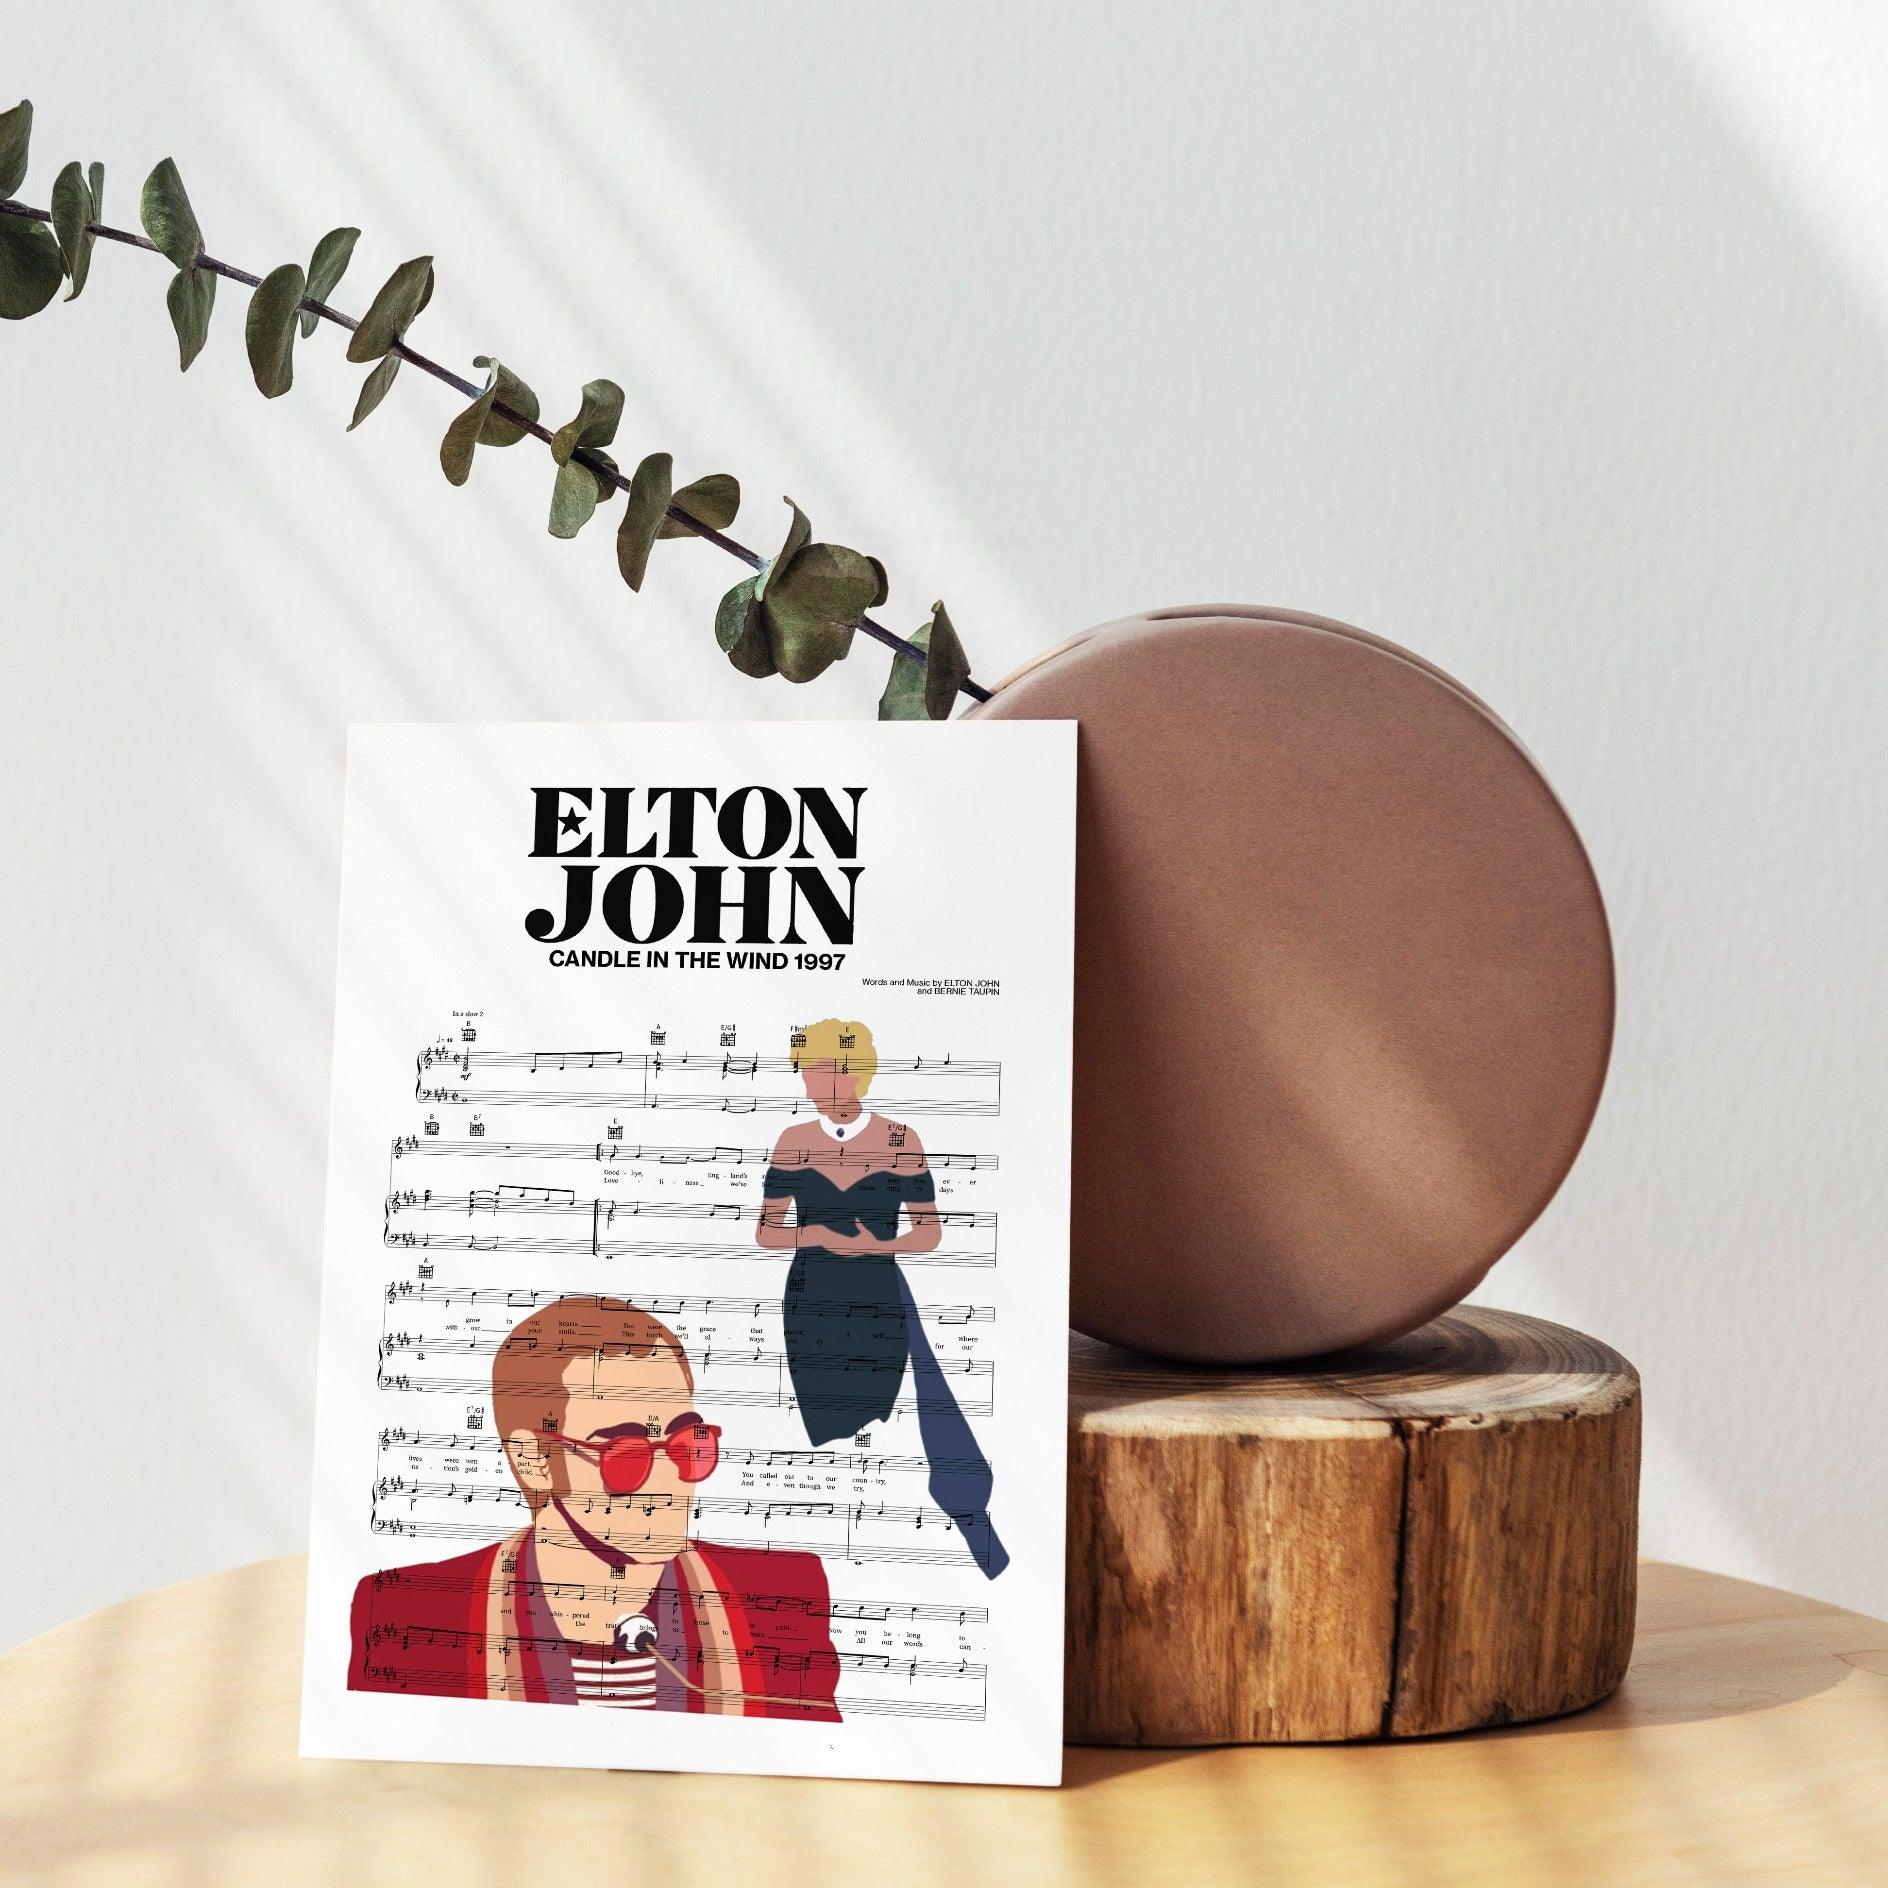 Music lovers rejoice! This Elton John - CANDLE IN THE WIND 1997 Poster is the perfect addition to your collection. This new arrival is guaranteed to add some POP to your décor. With Elton John's iconic lyrics, this poster is perfect for weddings and anniversaries. But really, it's a wonderful addition to any music lover's collection. Customize it with your own personalized message to make it extra special.